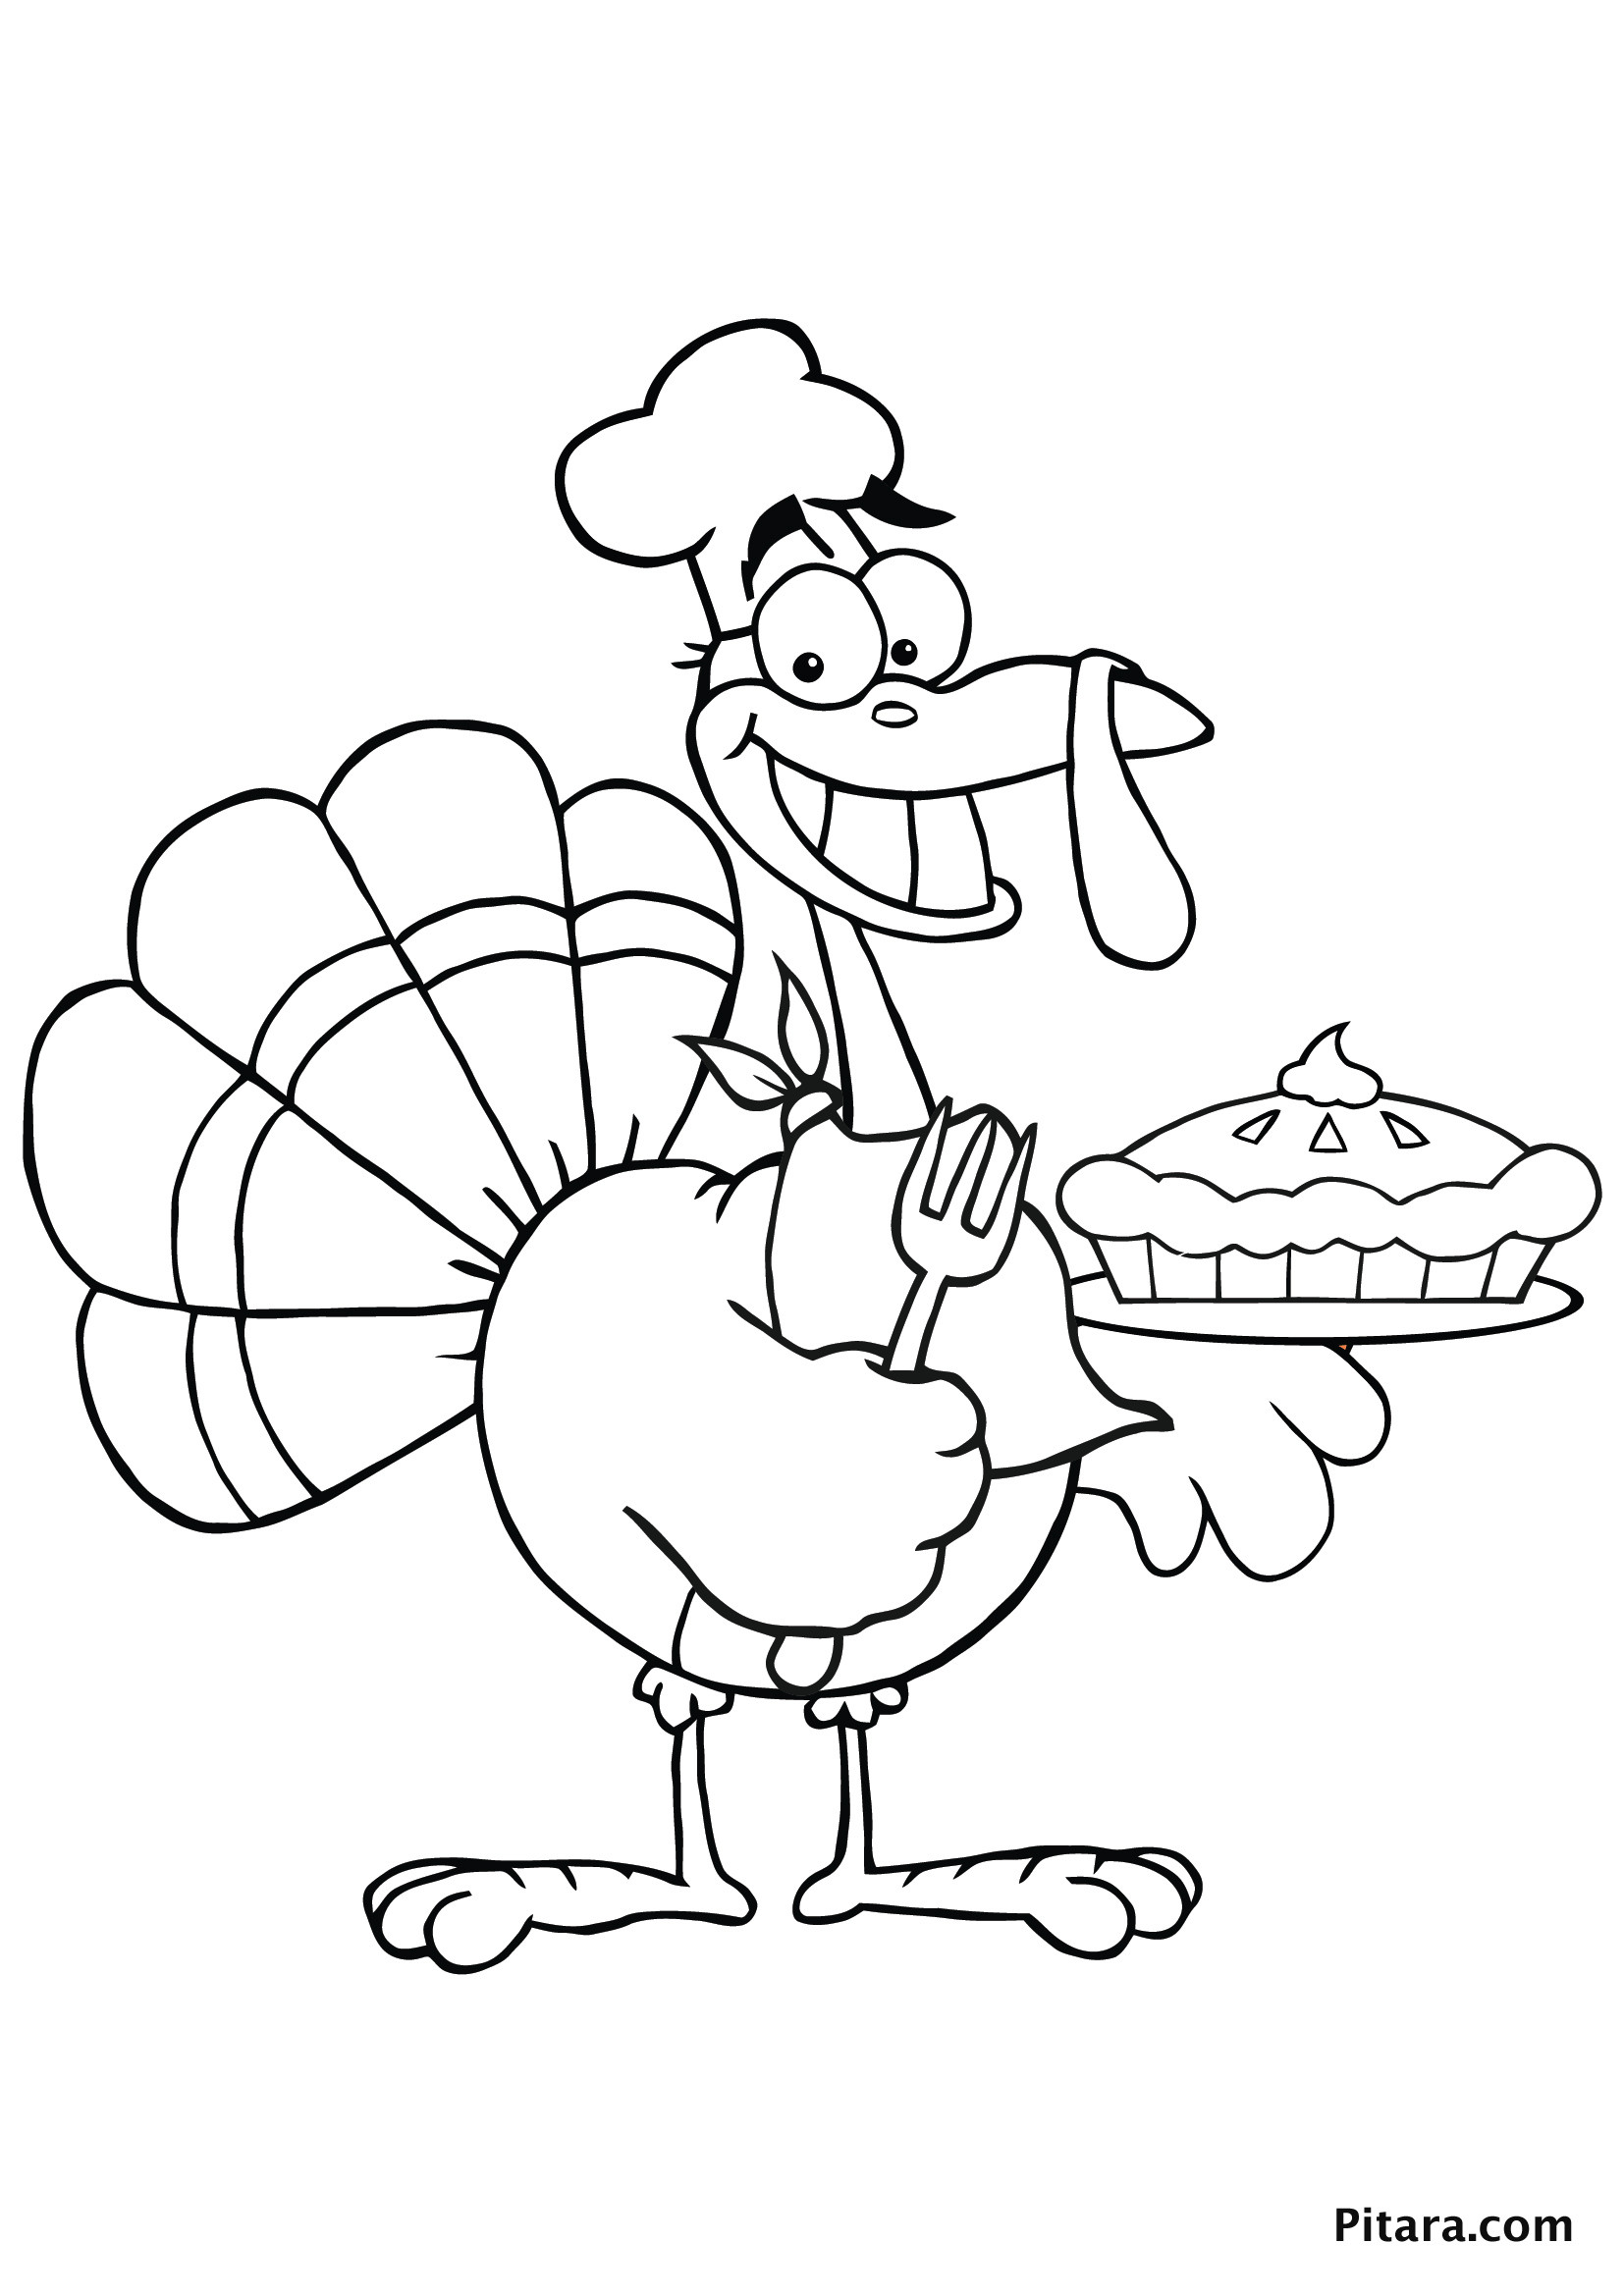 Coloring Sheets For Children
 Turkey Coloring Pages for Kids